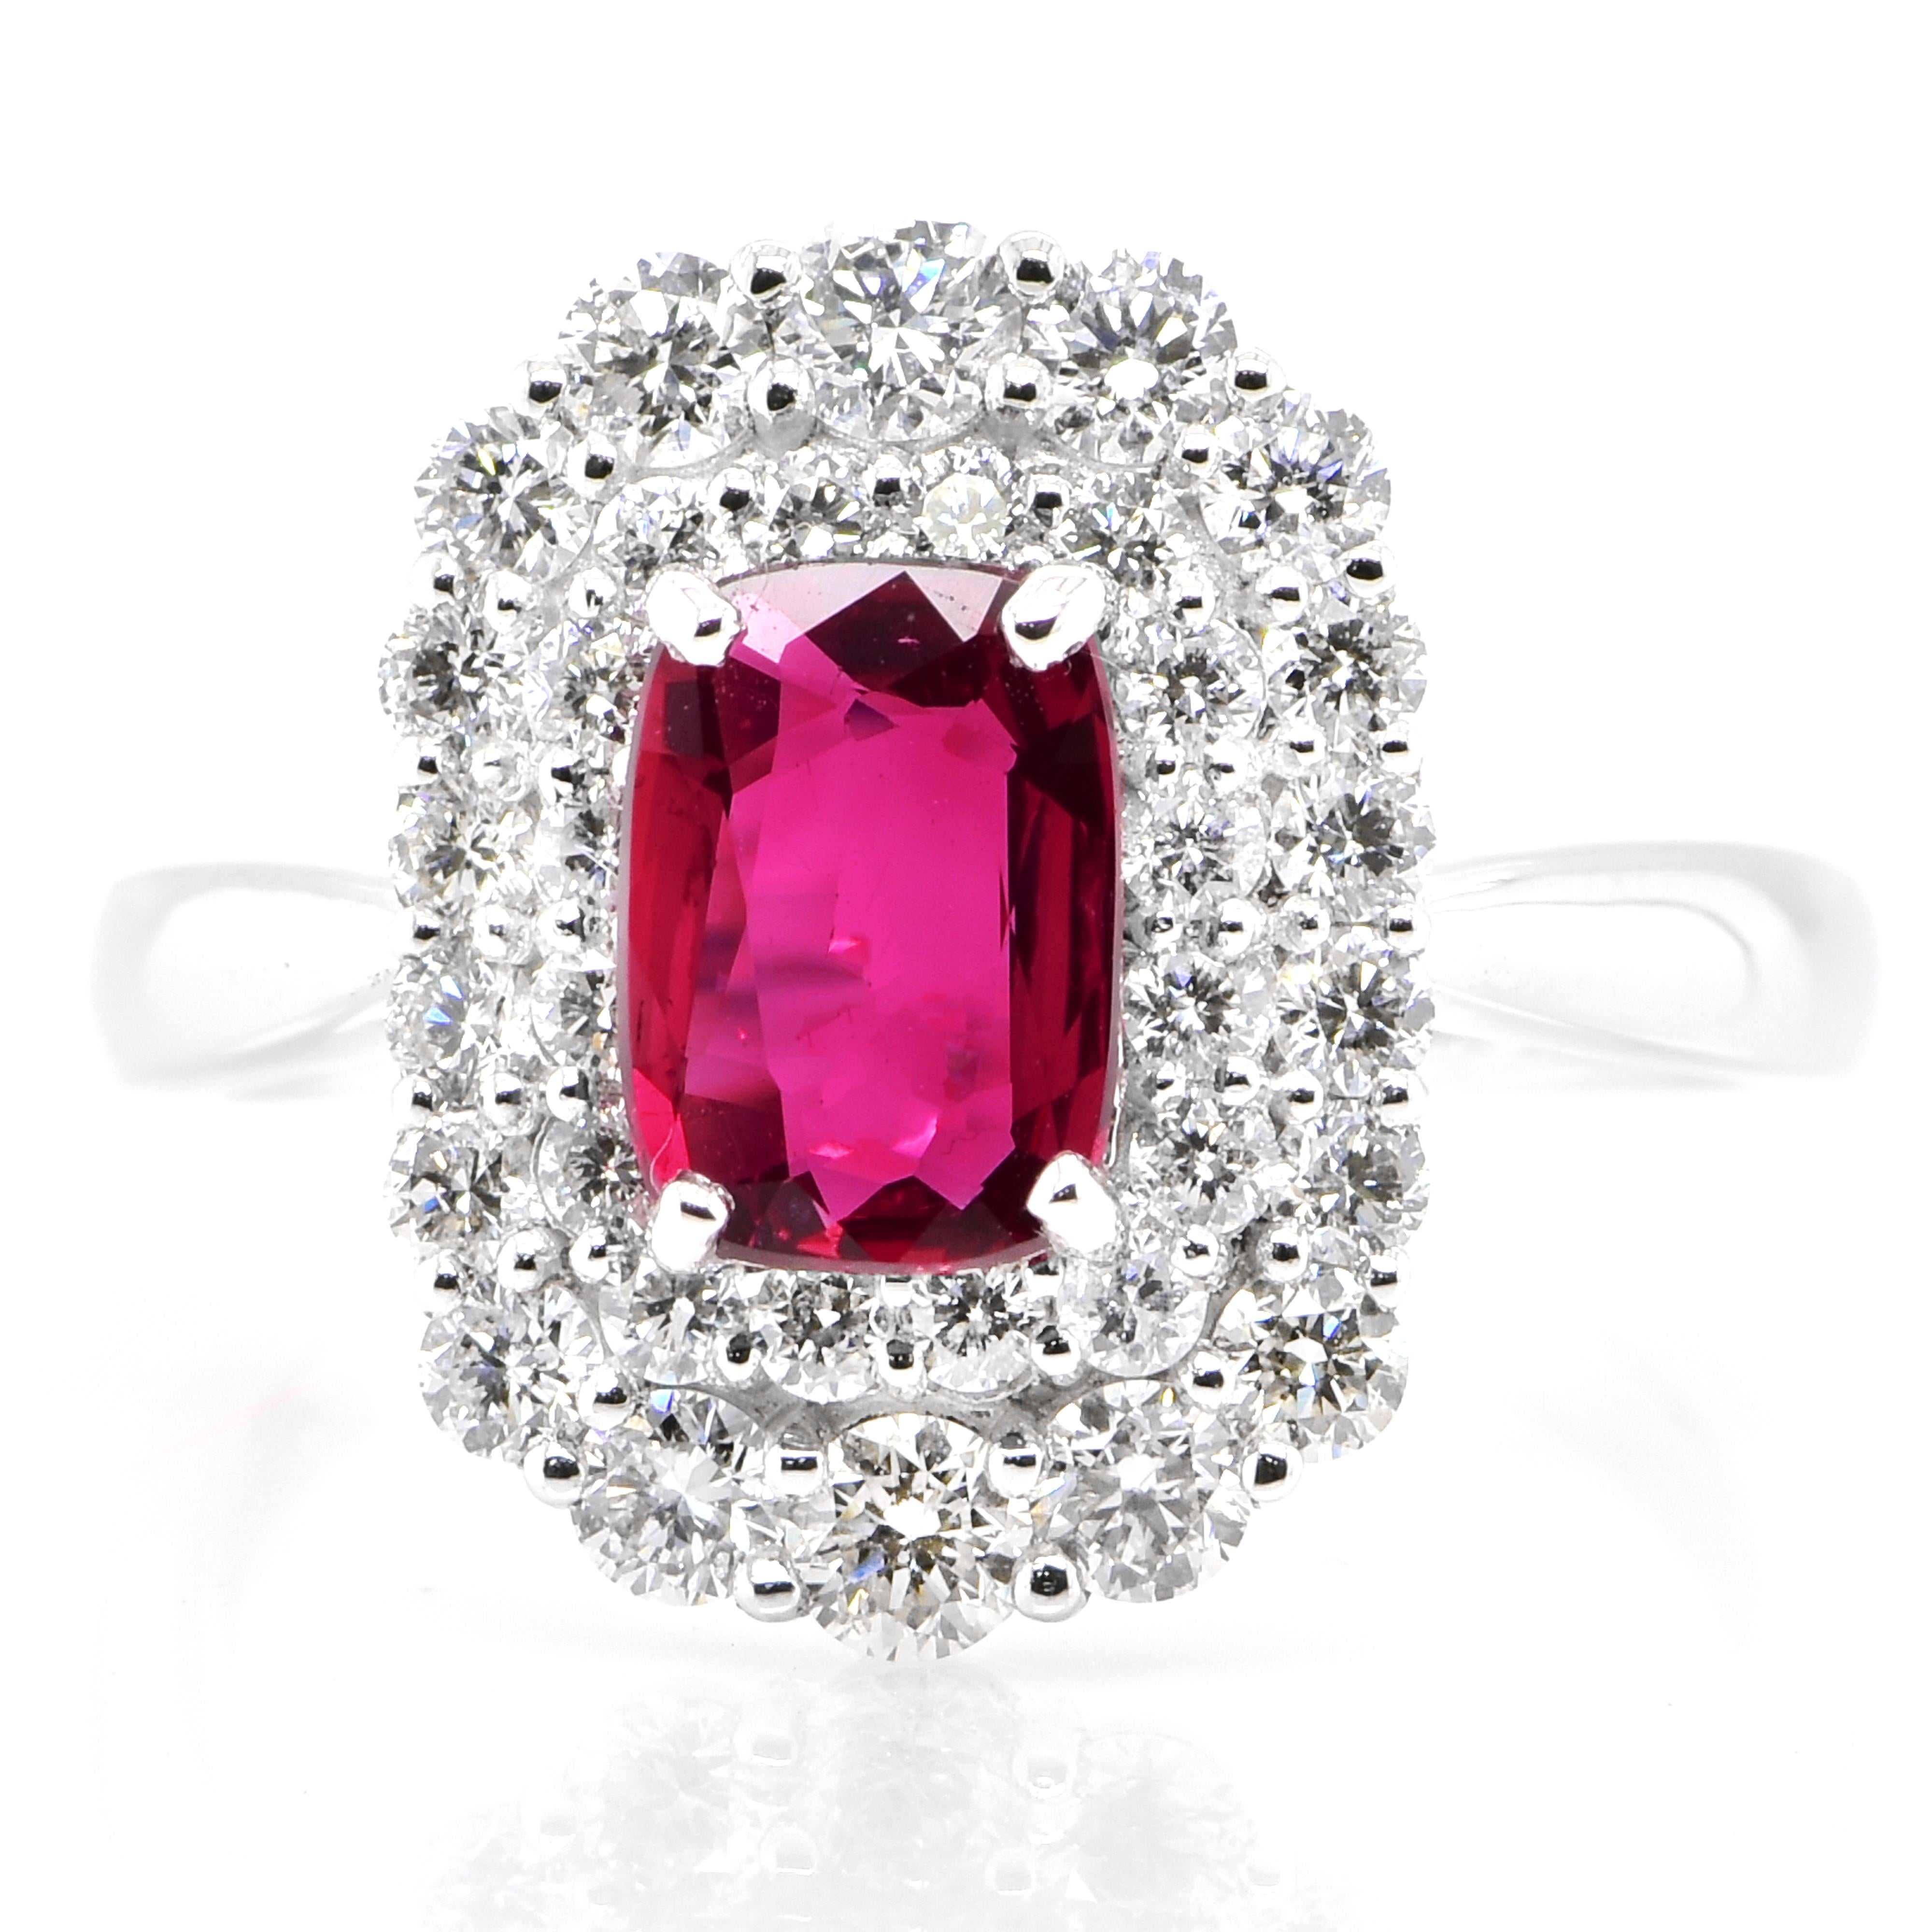 A beautiful Ring set in Platinum featuring a AIGS Certified 1.20 Carat Natural, Untreated (No Heat), Pigeon Blood Ruby and 0.92 Carat Diamonds. Rubies are referred to as 